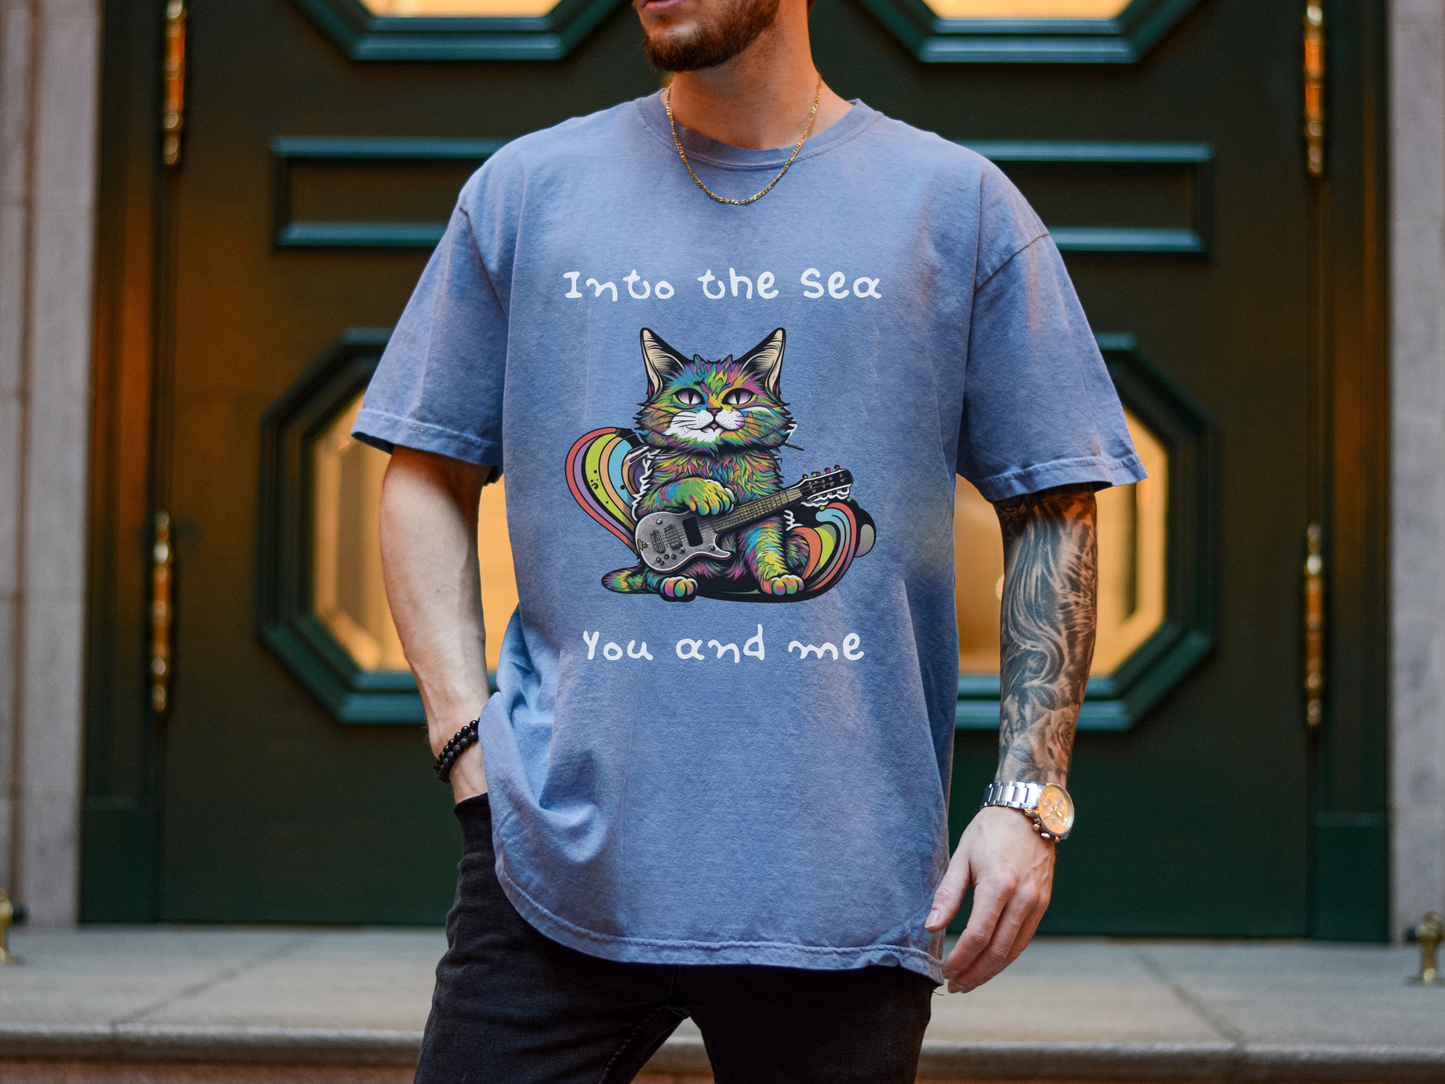 The Cure "Lovecats" T-Shirt in Blue Jean